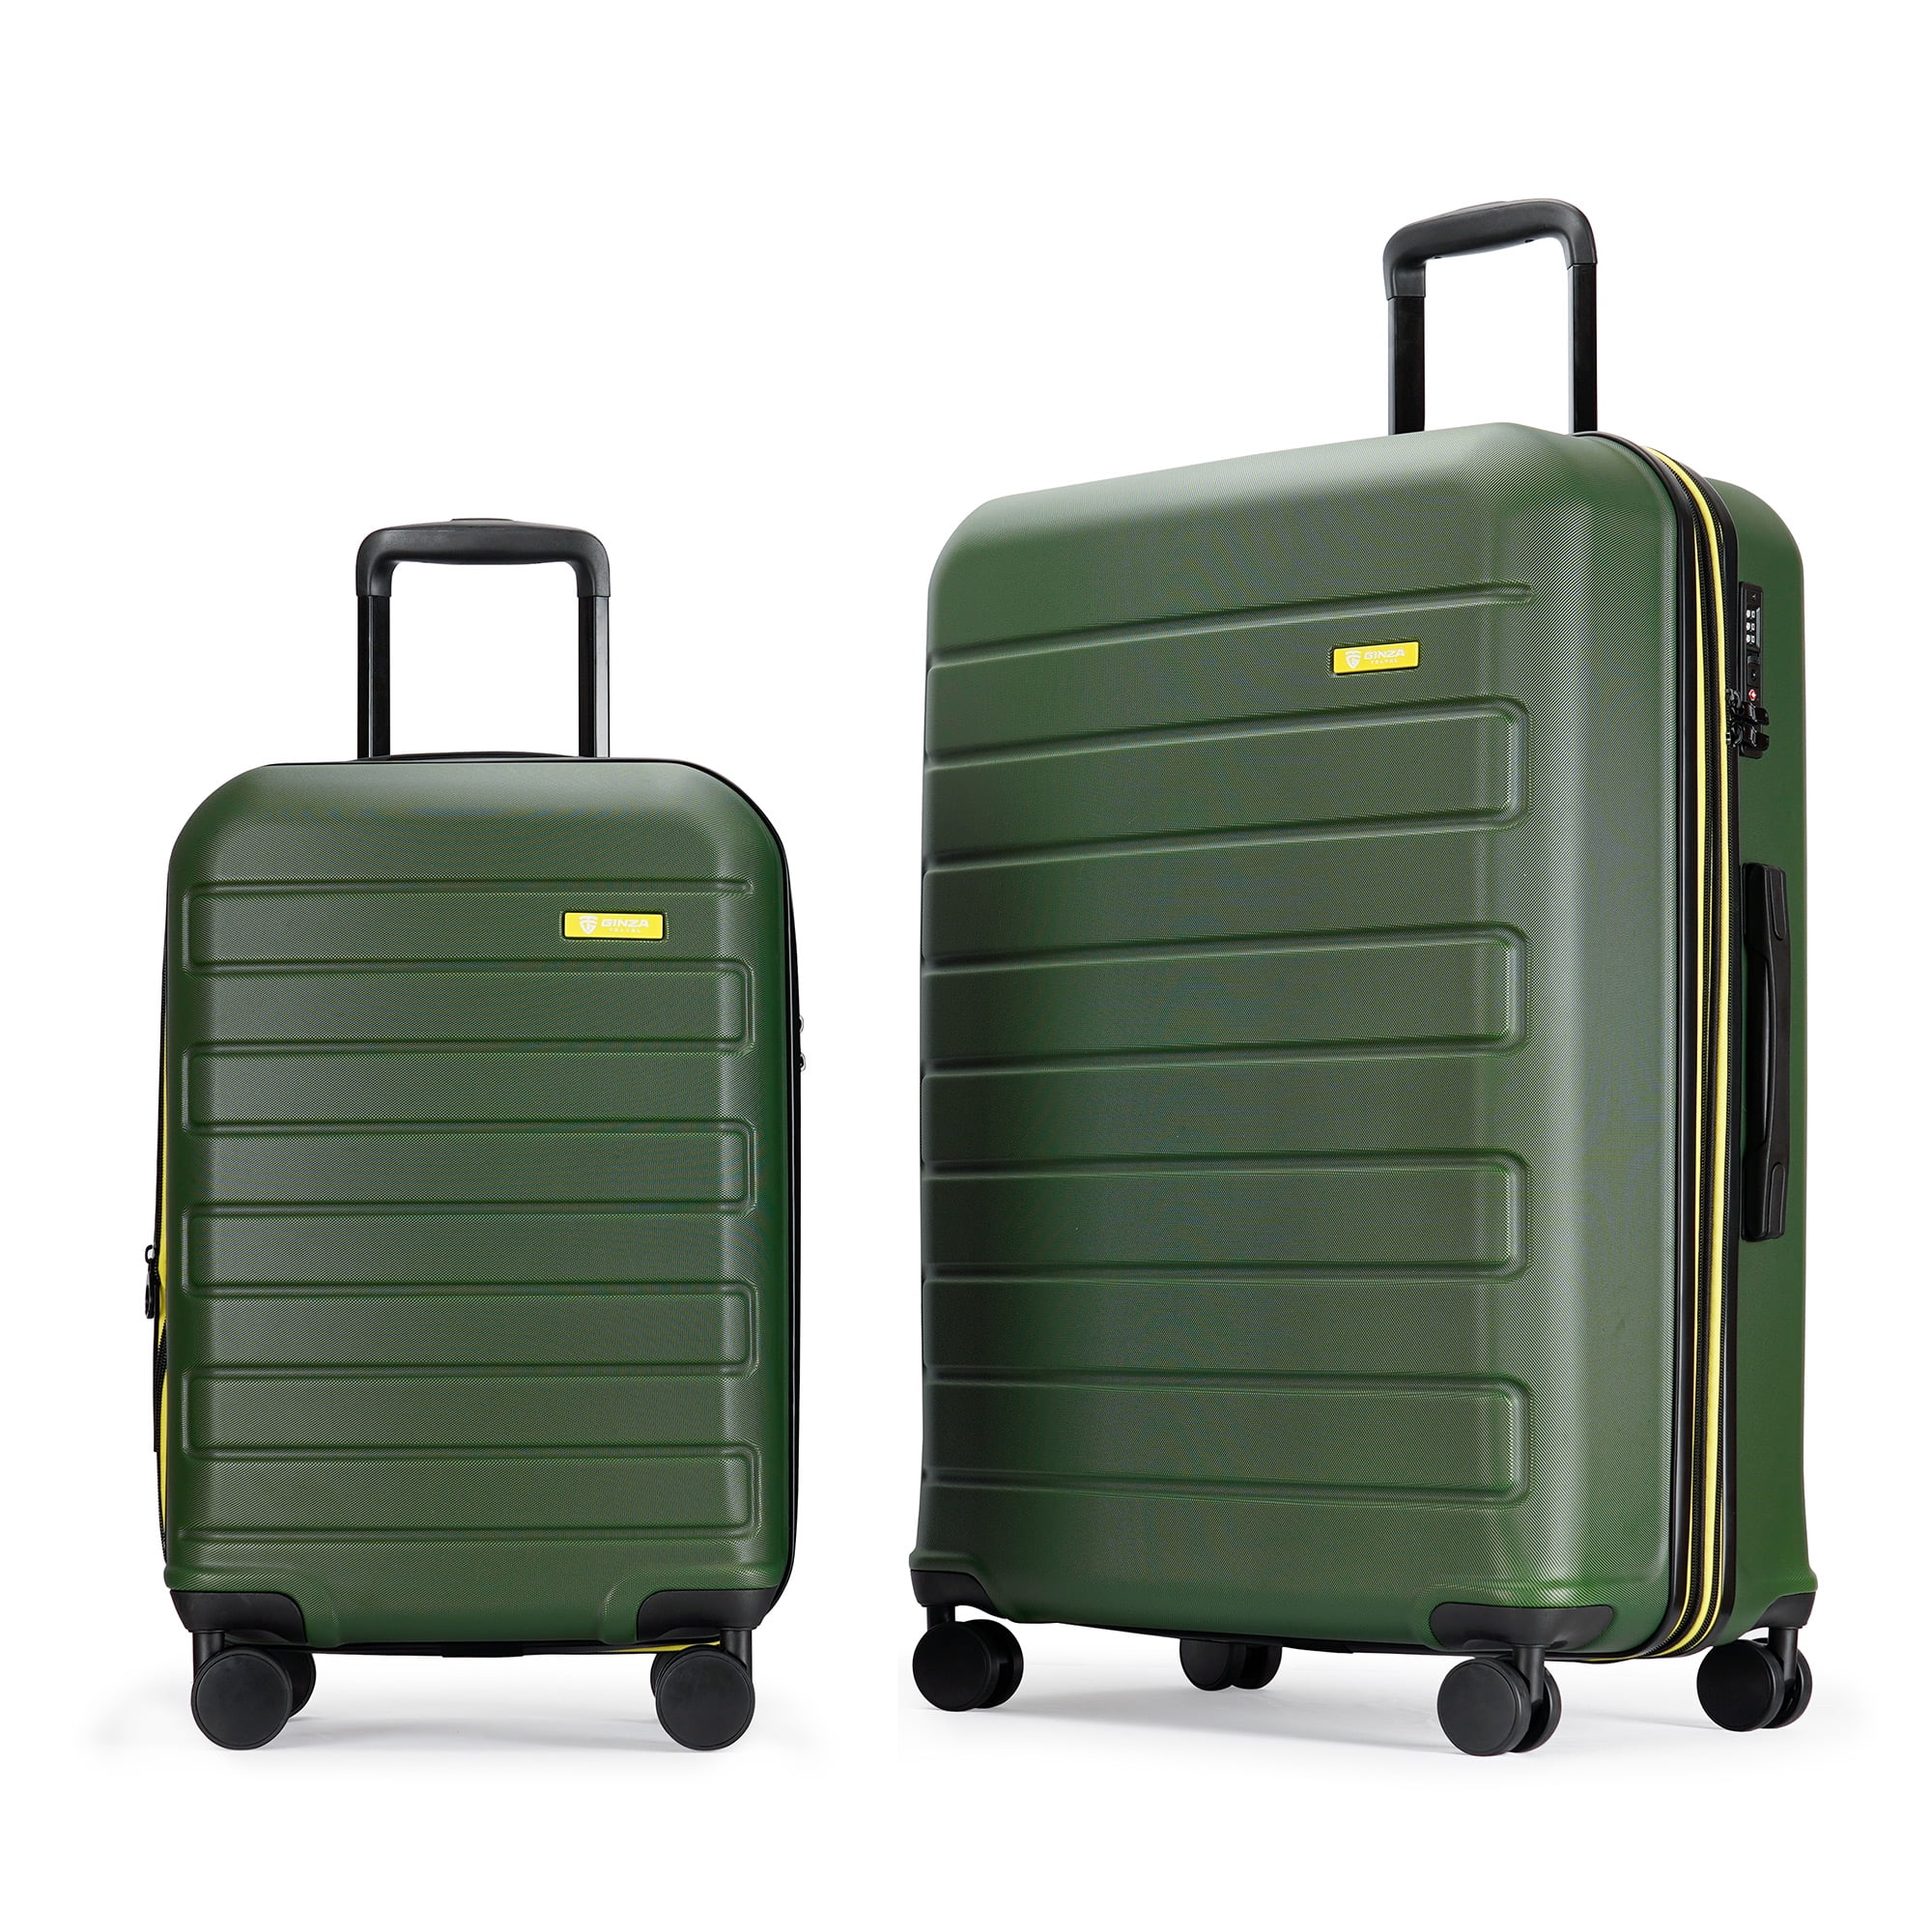 Ginza Travel 3 Piece Luggage Sets Hard Shell Expandable Suitcase Set with  Spinner Wheels for Travel Trips Business 20 24 28,Green 